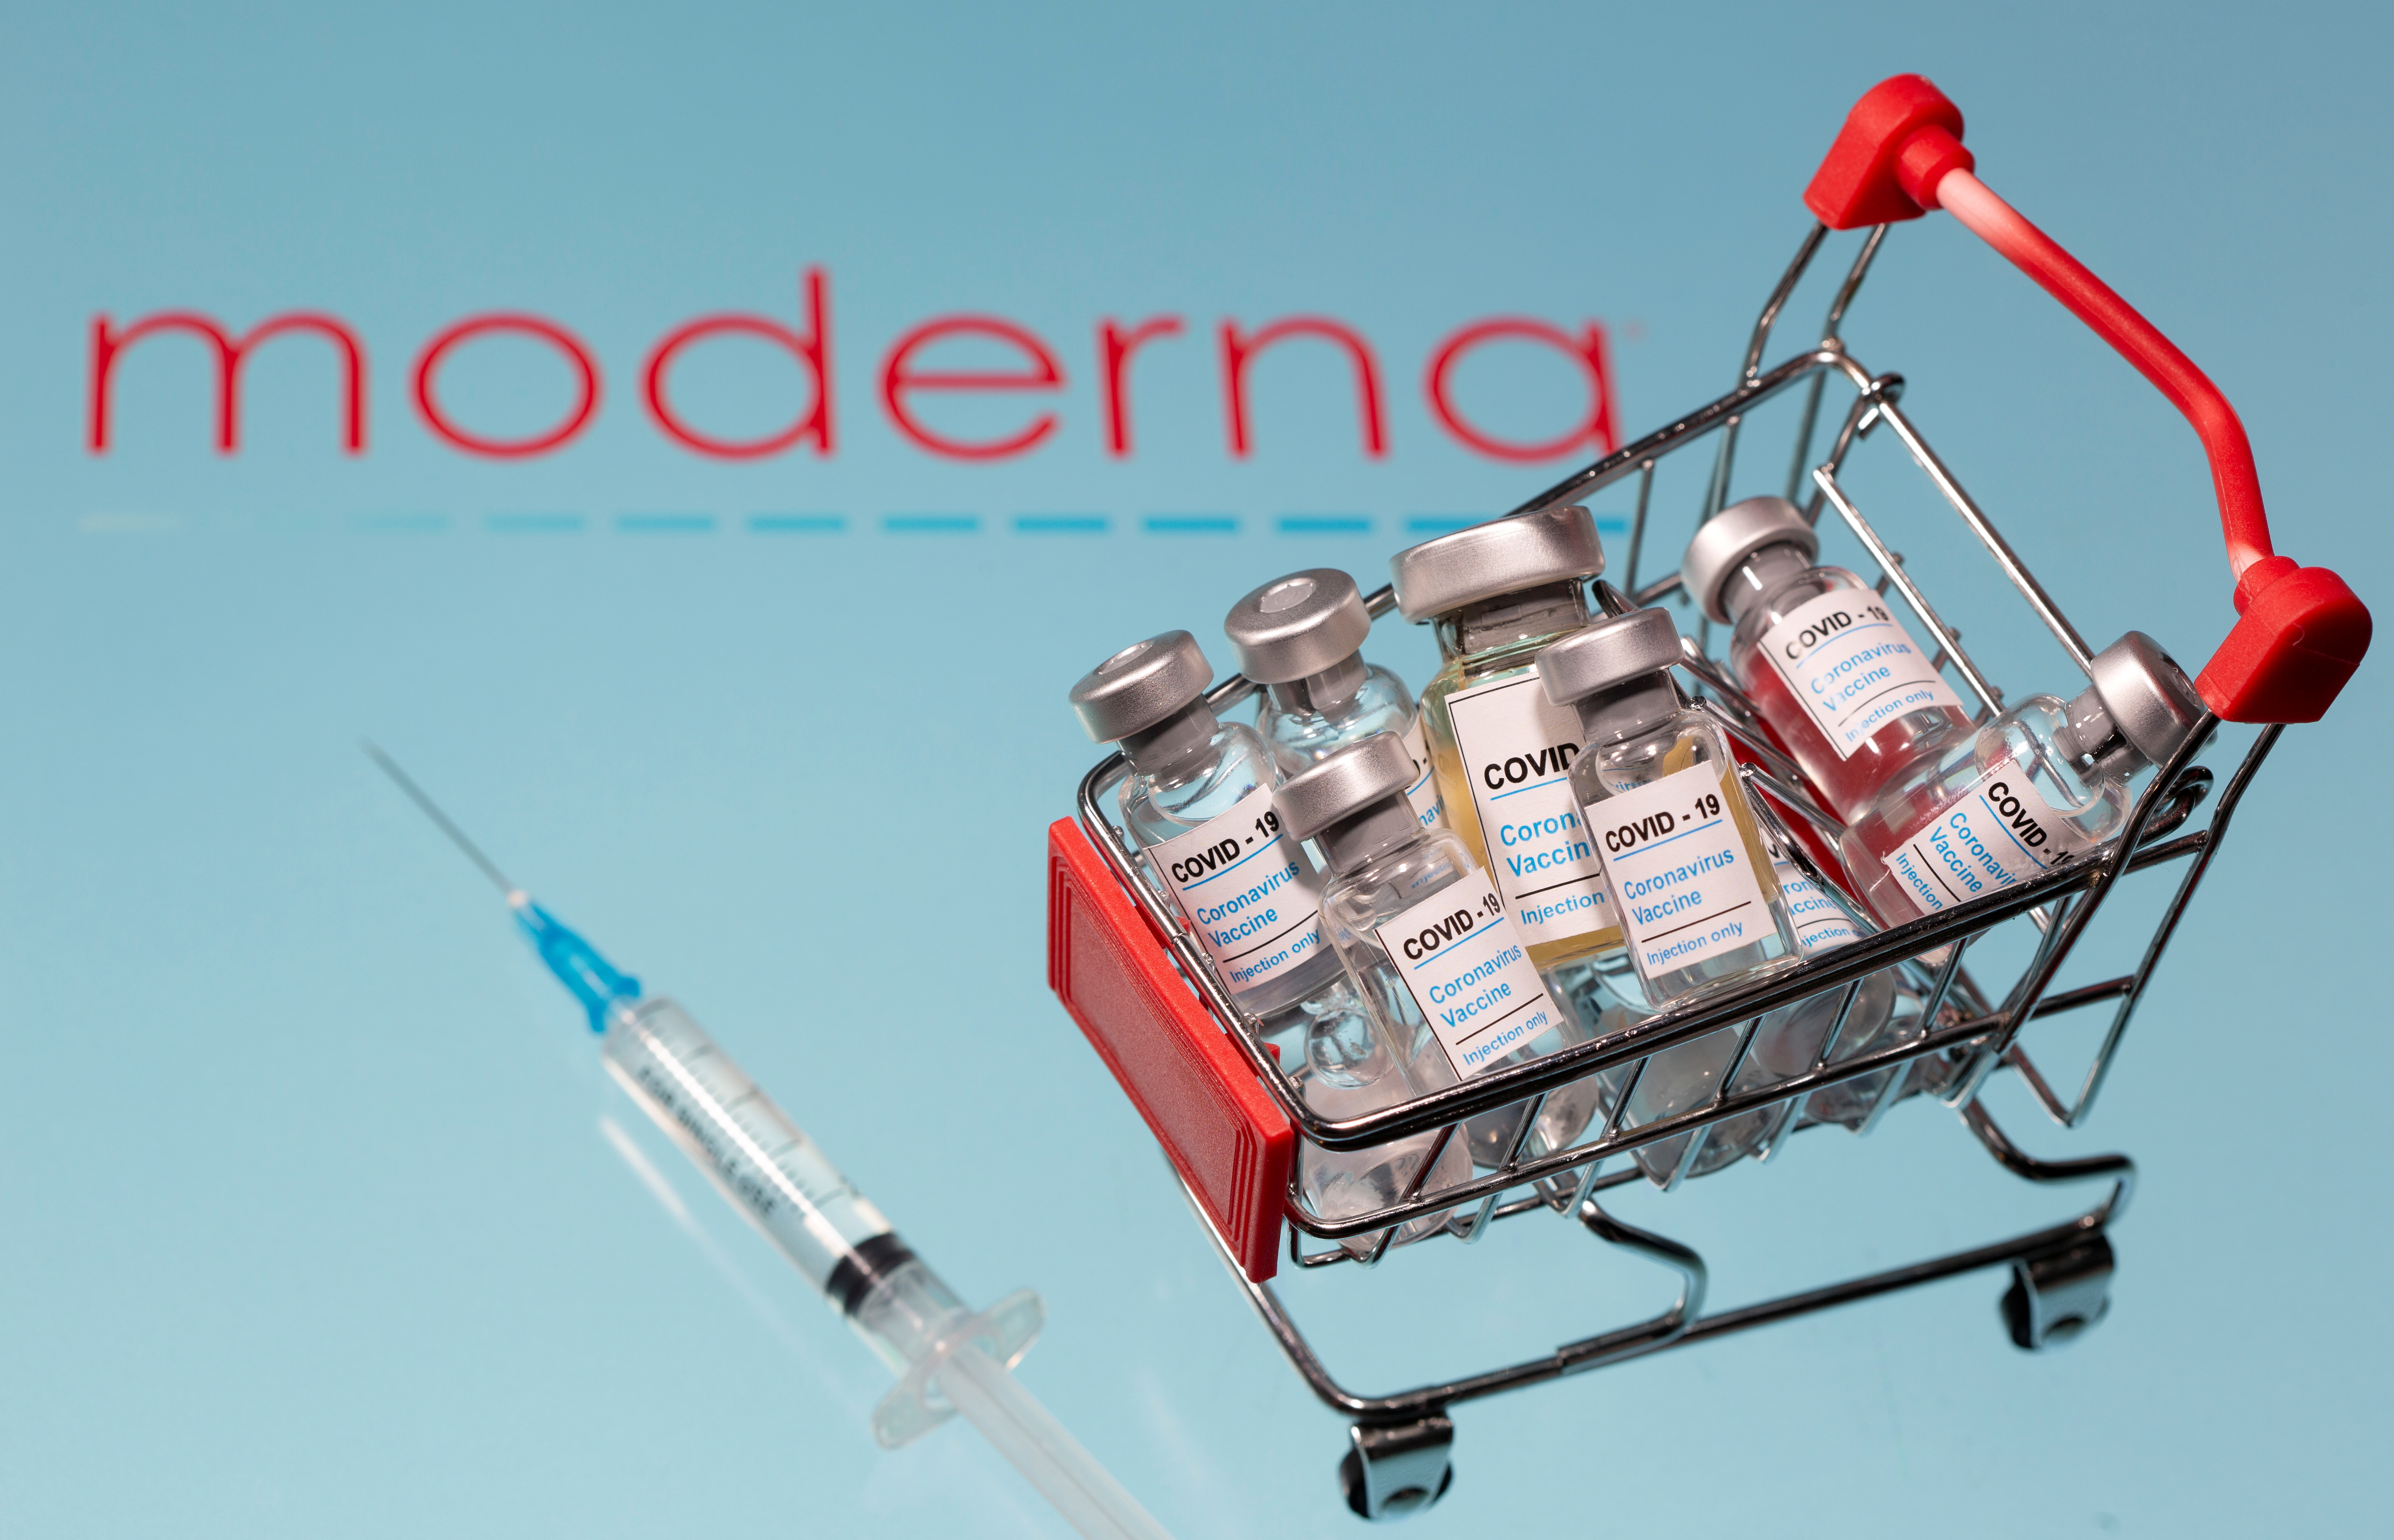 A small shopping basket filled with vials labelled "COVID-19 - Coronavirus Vaccine" and a medical syringe are placed on a Moderna logo